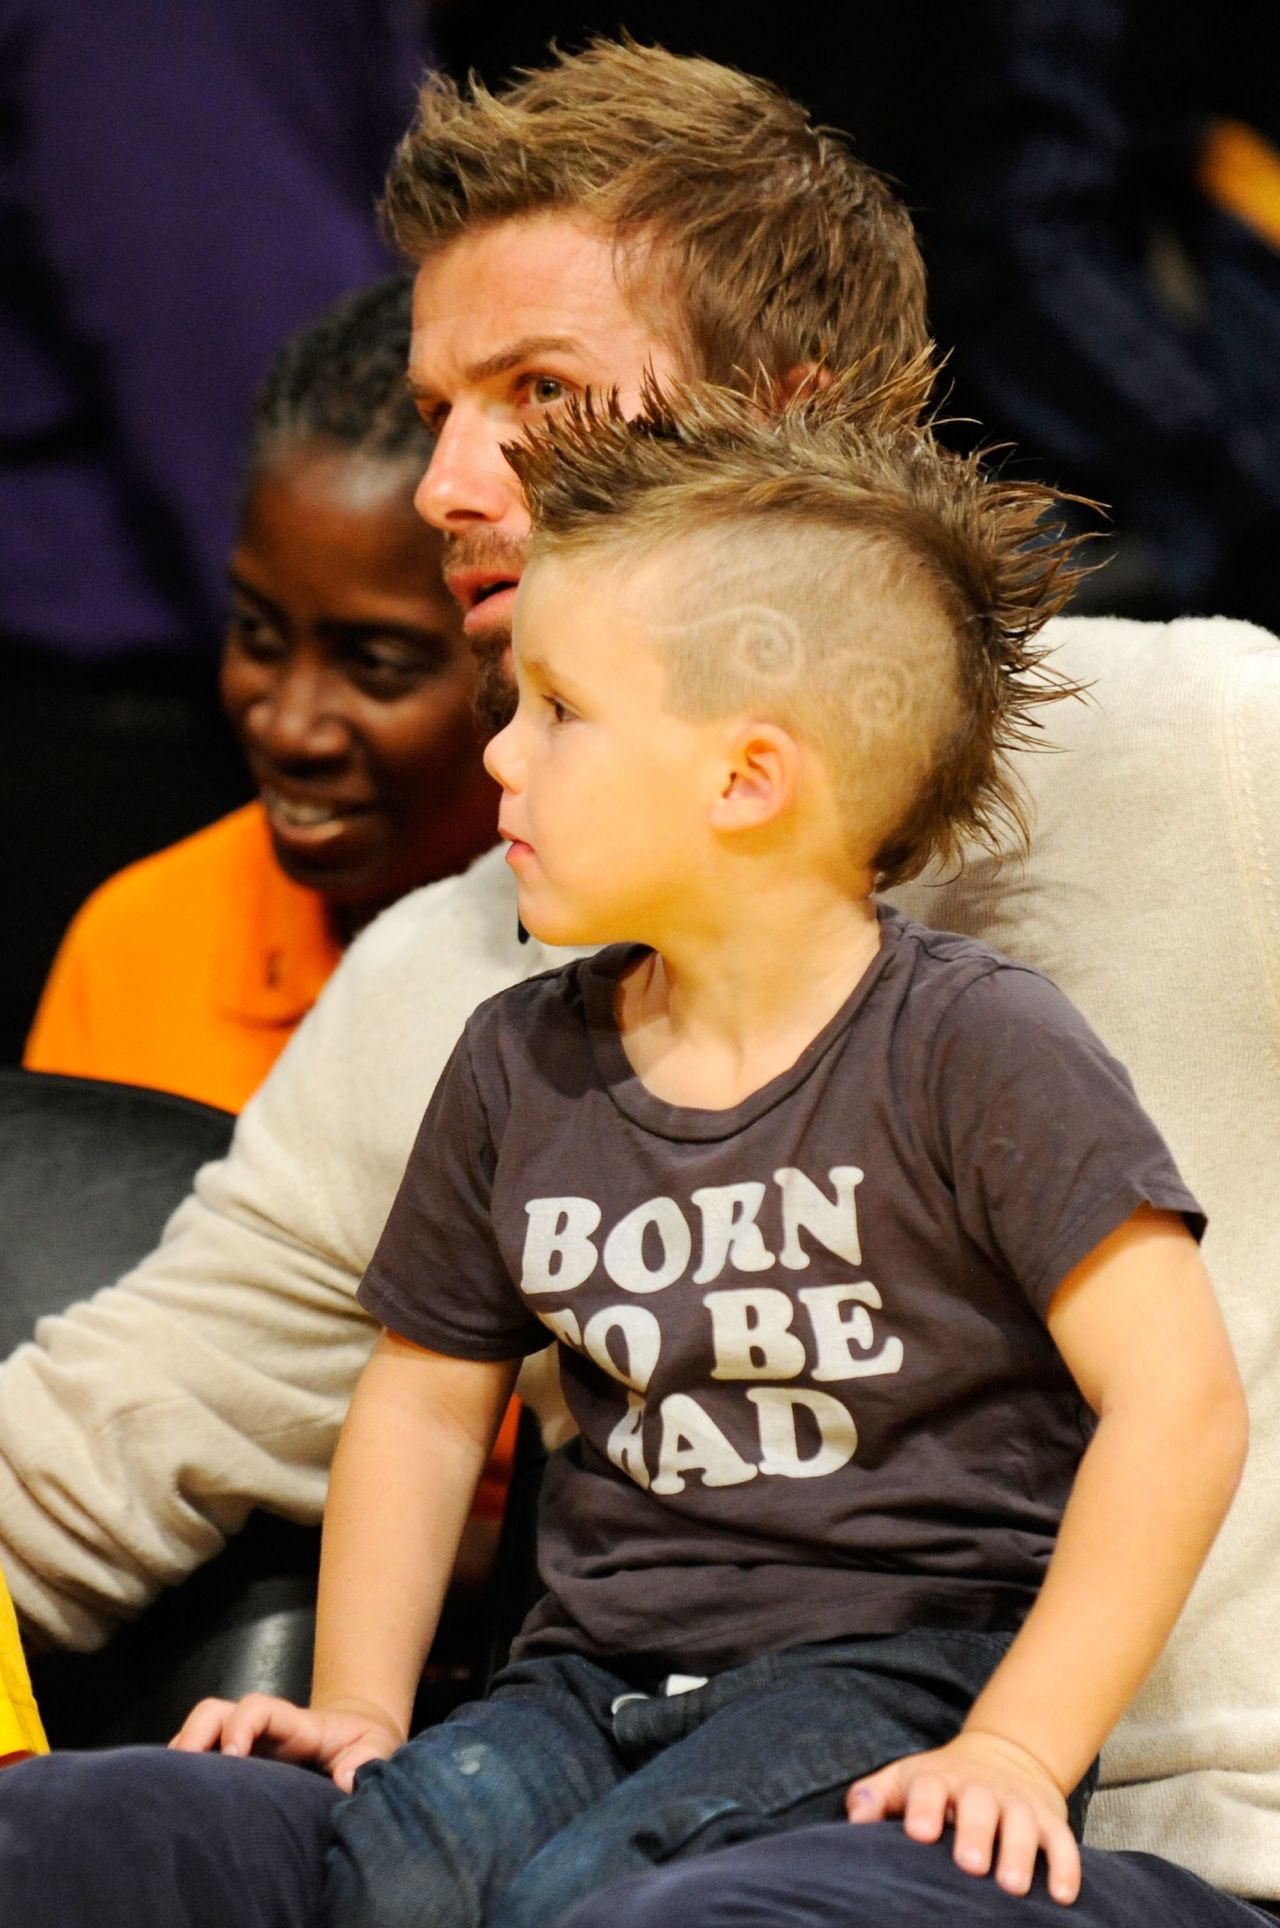 Like father, like son: the Beckhams' third offspring Cruz with his dad at an NBA game in LA in 2009.